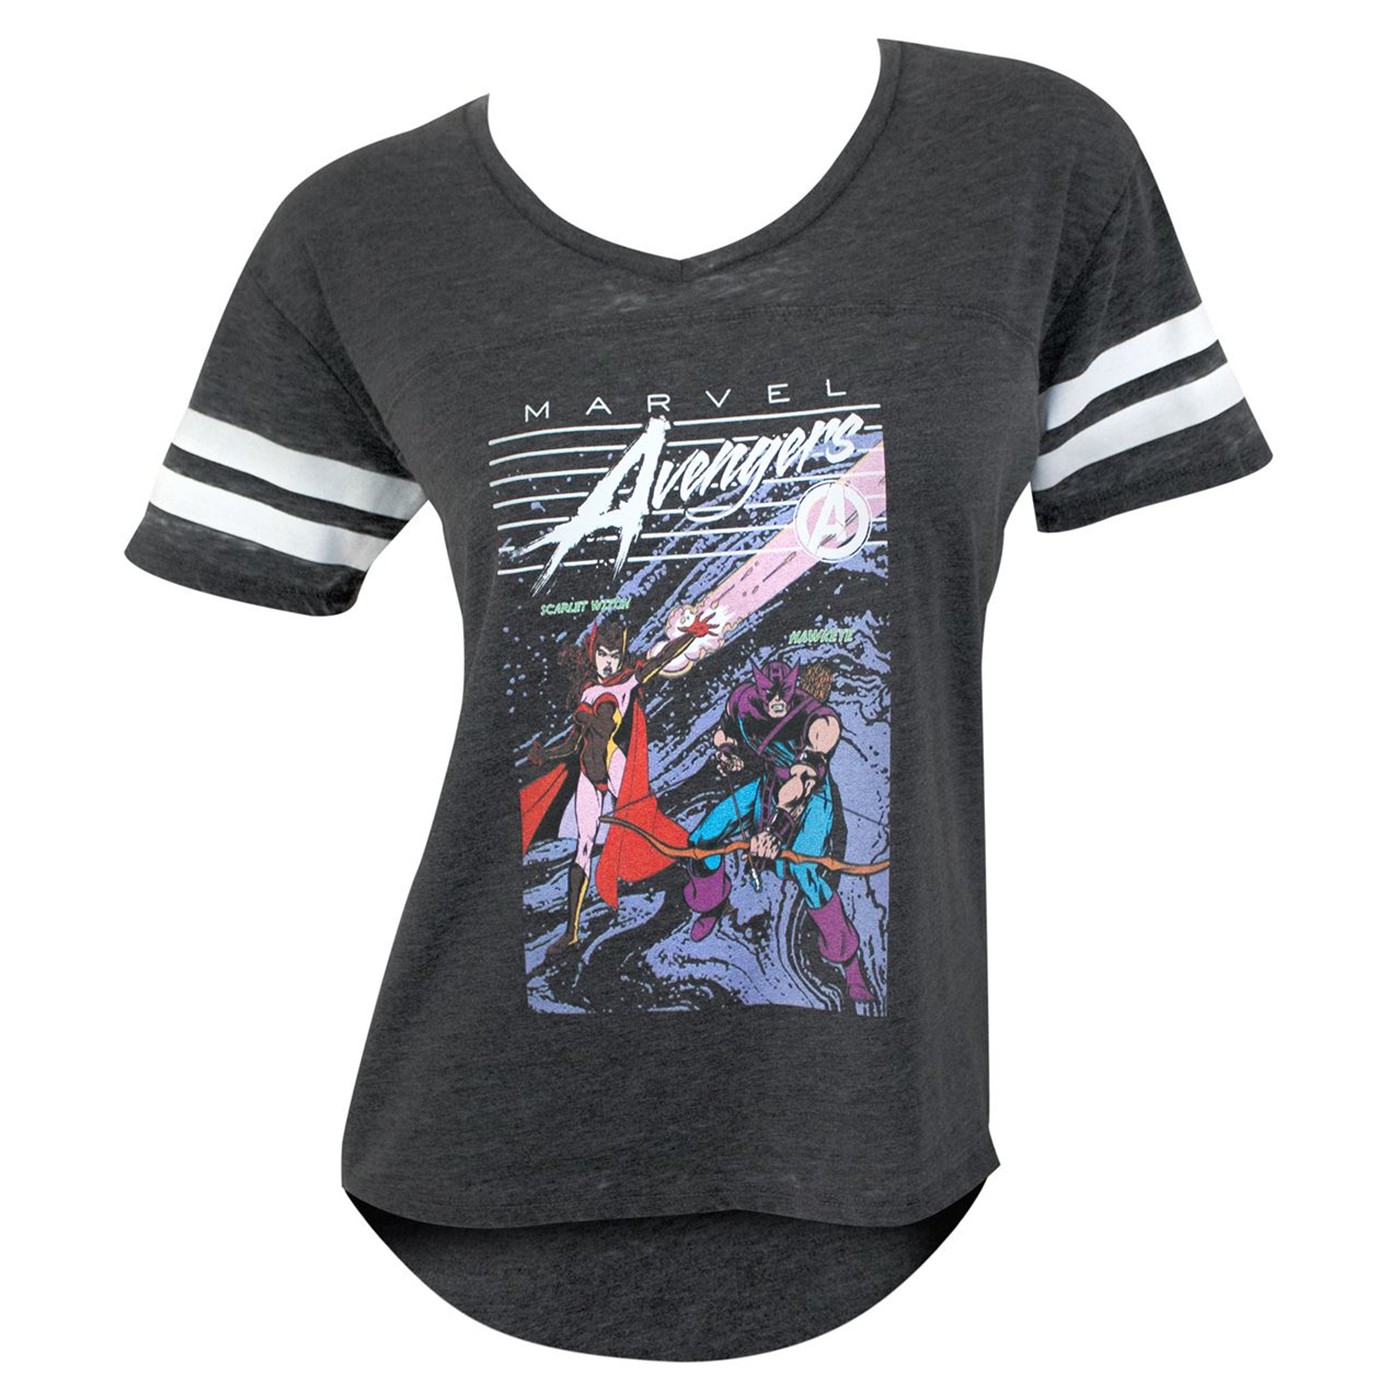 Avengers Scarlet Witch and Hawkeye Women's Jersey T-Shirt